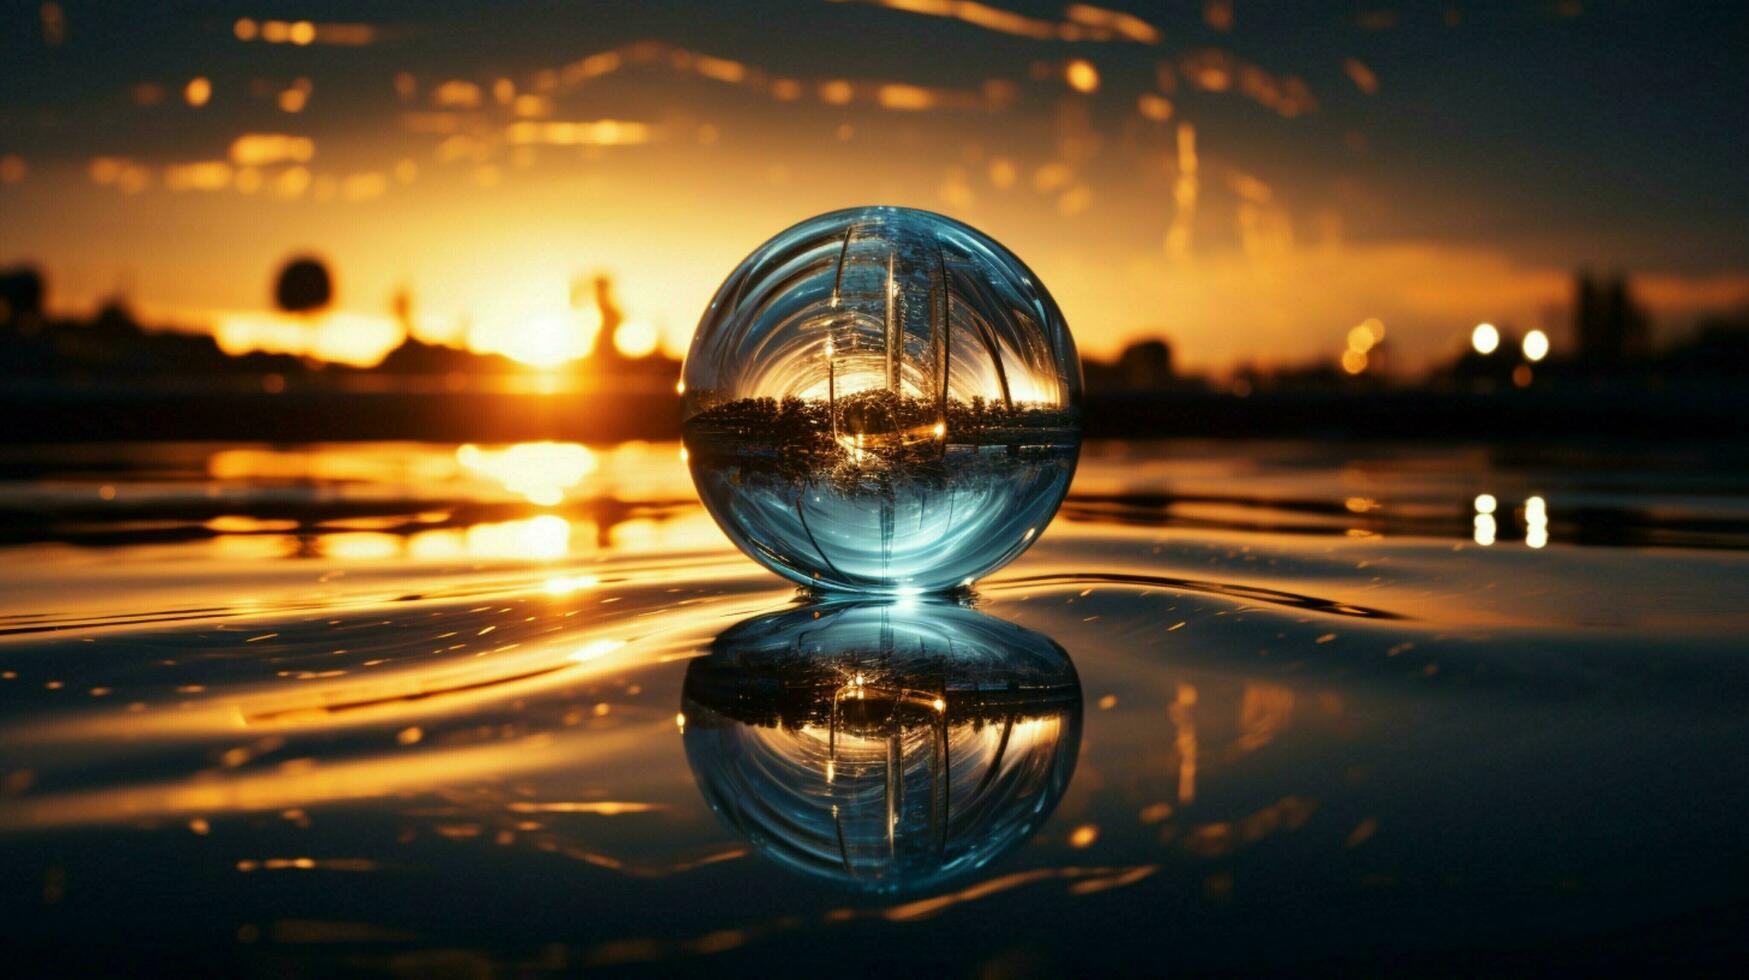 wet sphere on reflective water abstract beauty photo